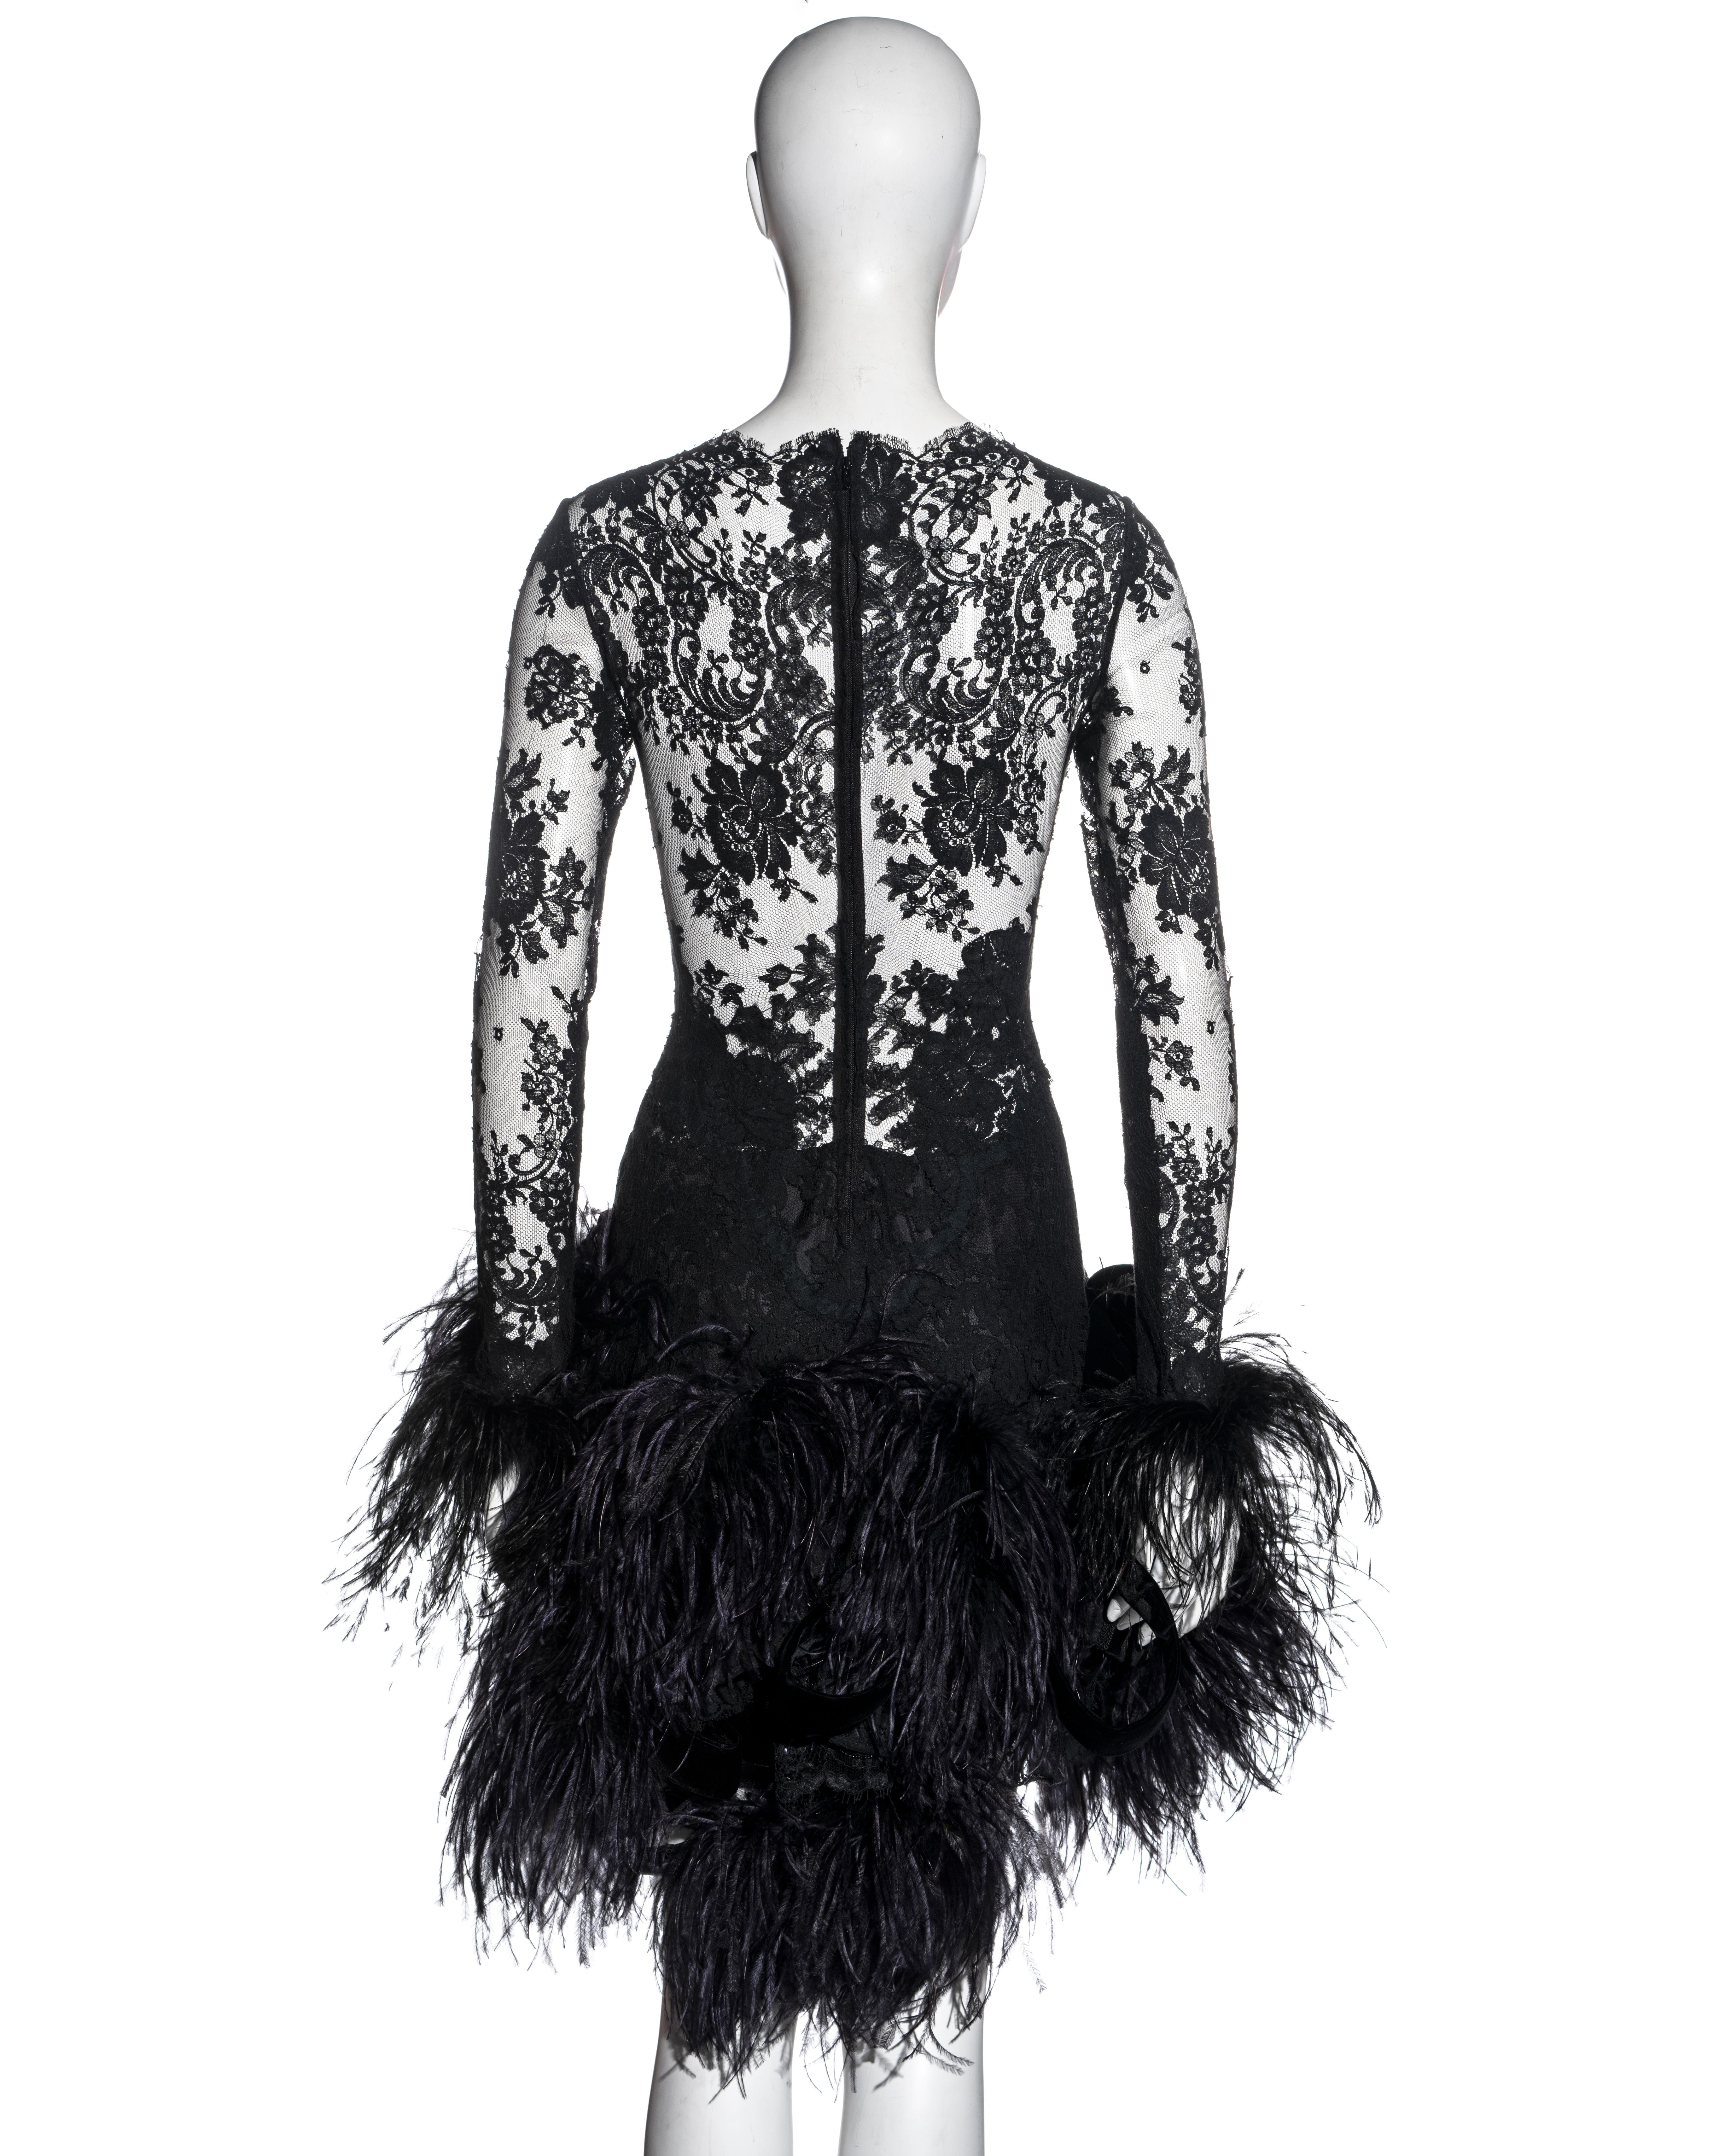 Women's Galitzine Couture black lace and ostrich feather evening dress, c. 1980 For Sale